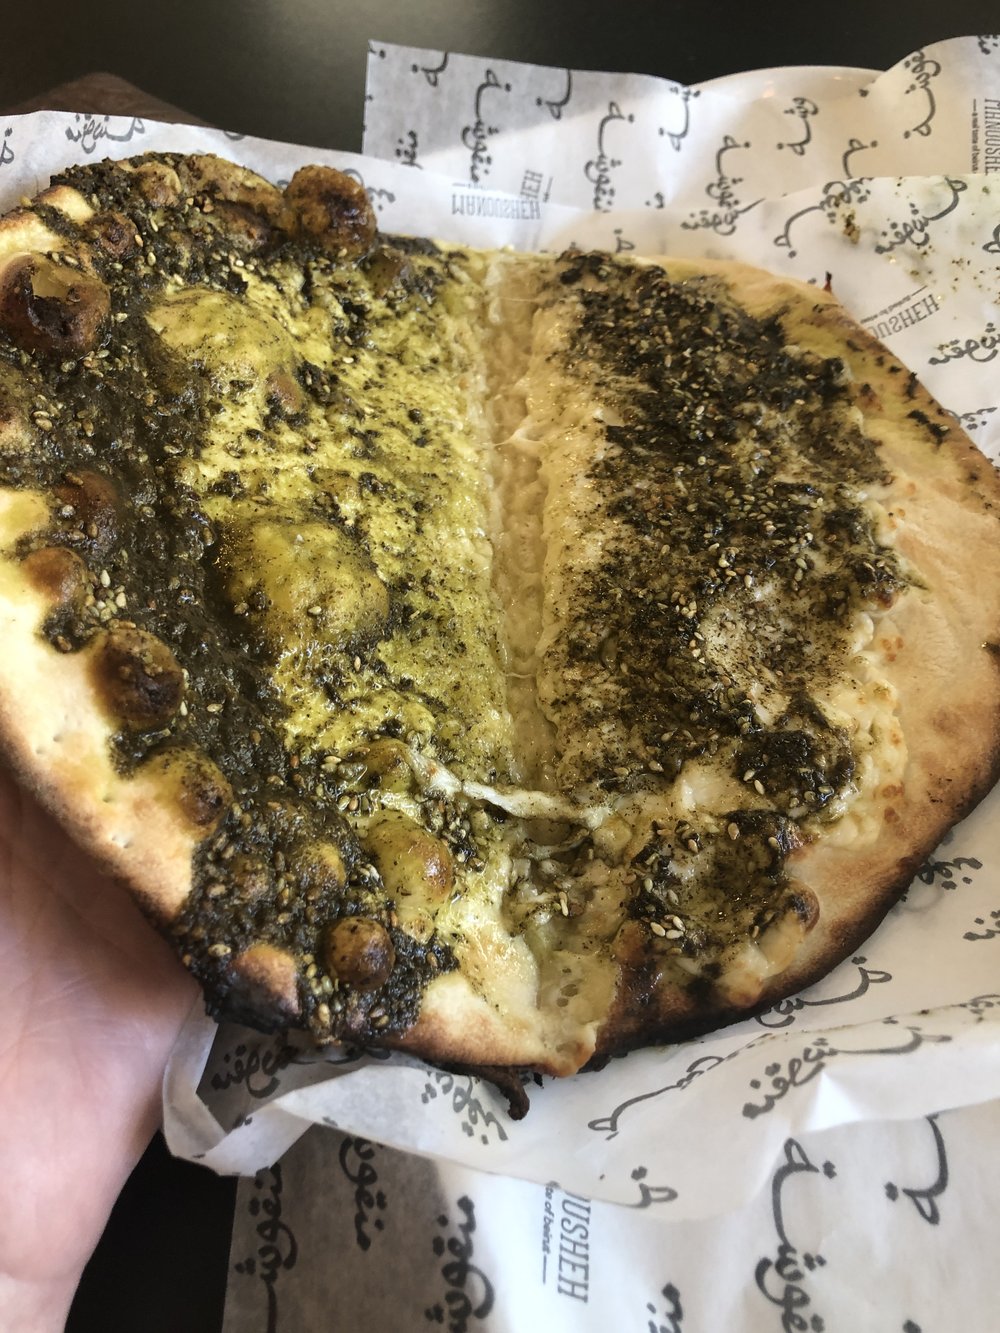 Zaatar and cheese melt together in the best way.